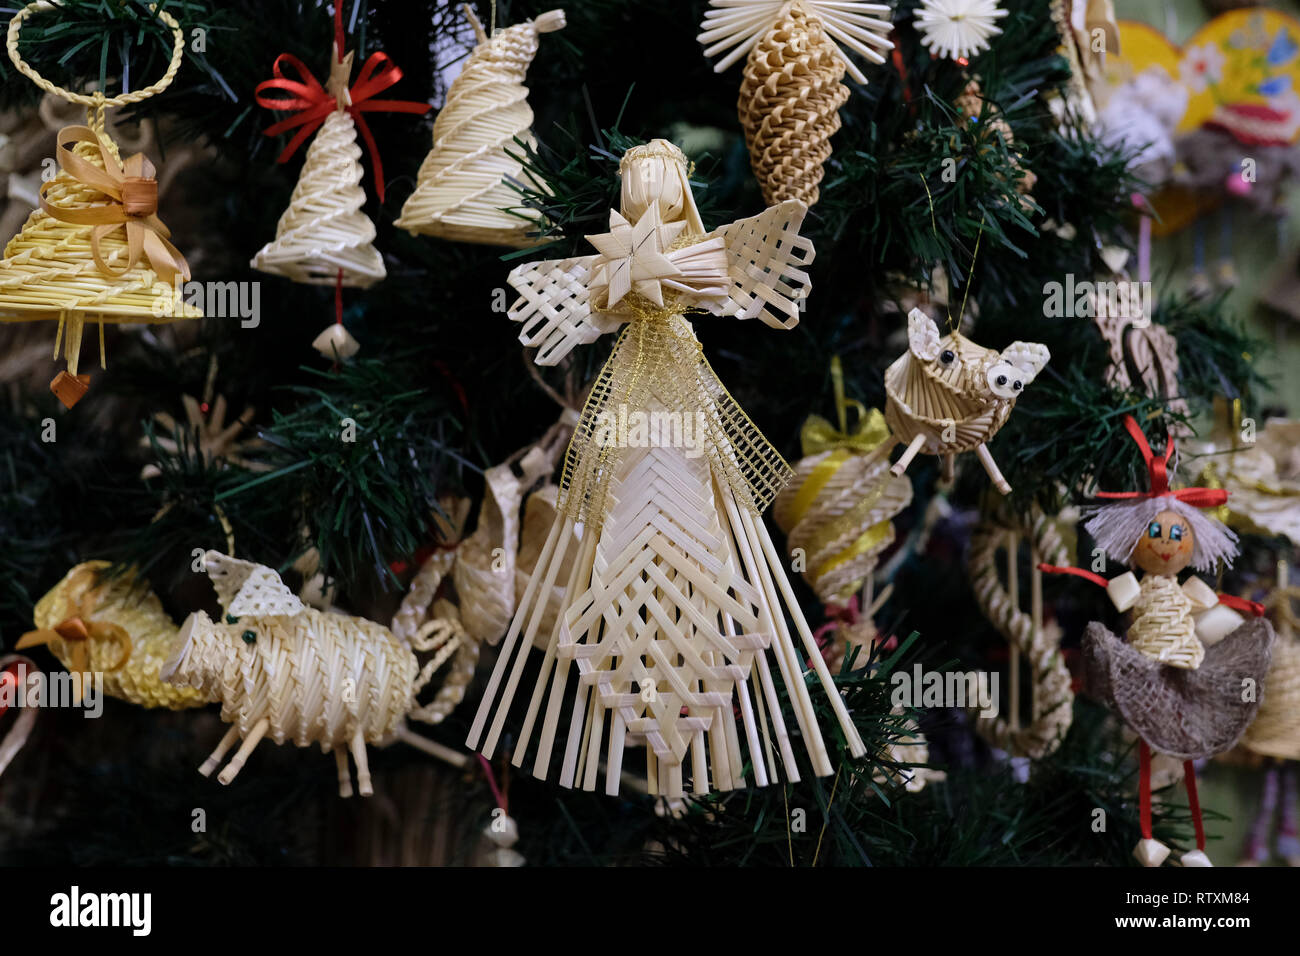 https://c8.alamy.com/comp/RTXM84/traditional-christmas-decorations-made-from-straw-in-belarus-RTXM84.jpg